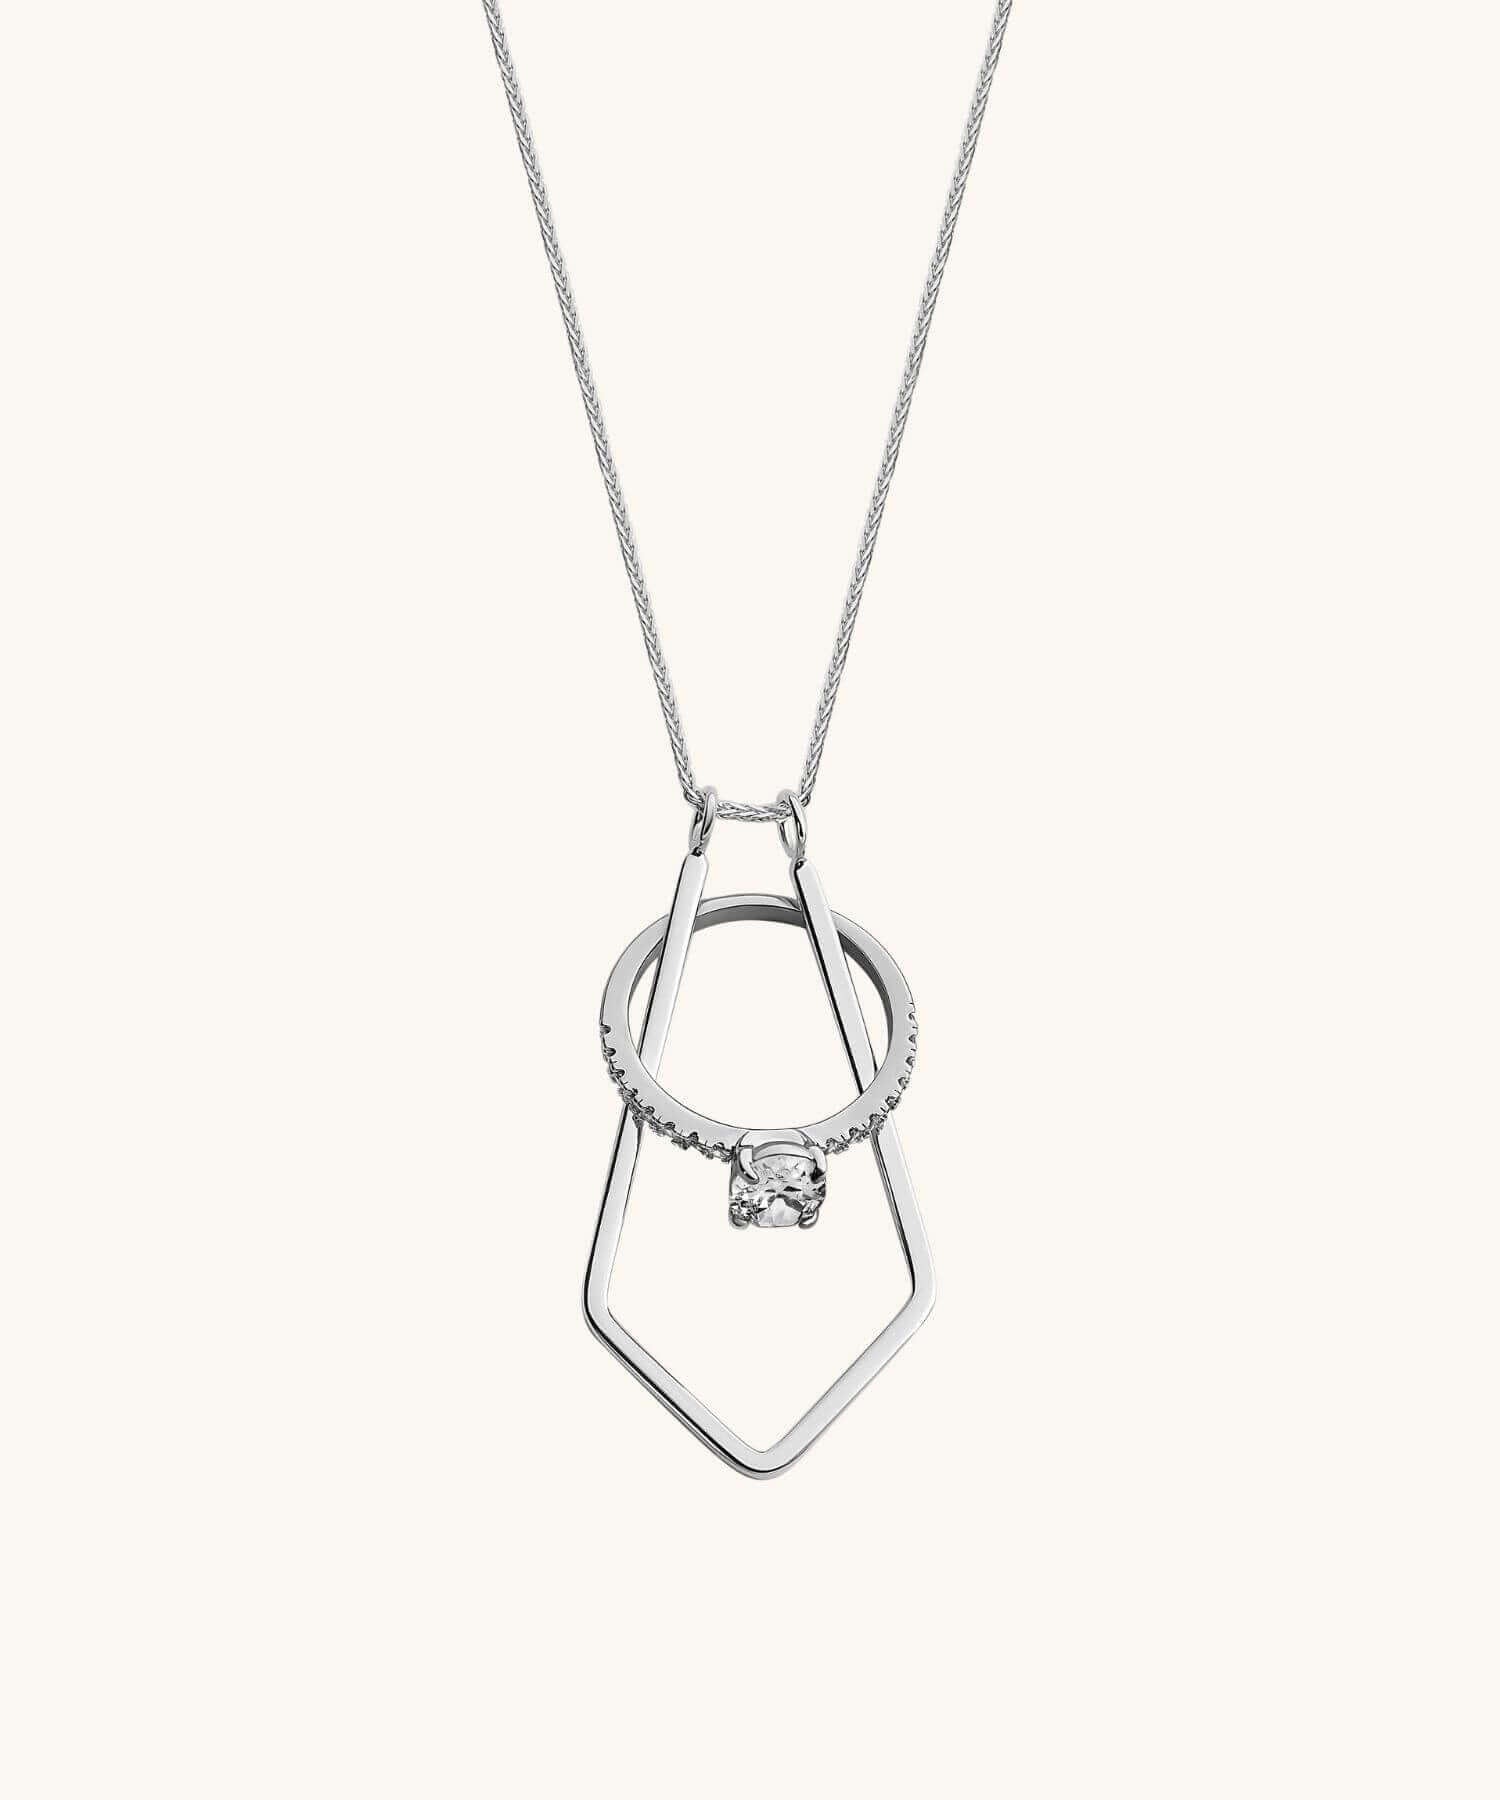 The Best Ring Holder Necklaces You Can Buy | Emmaline Bride